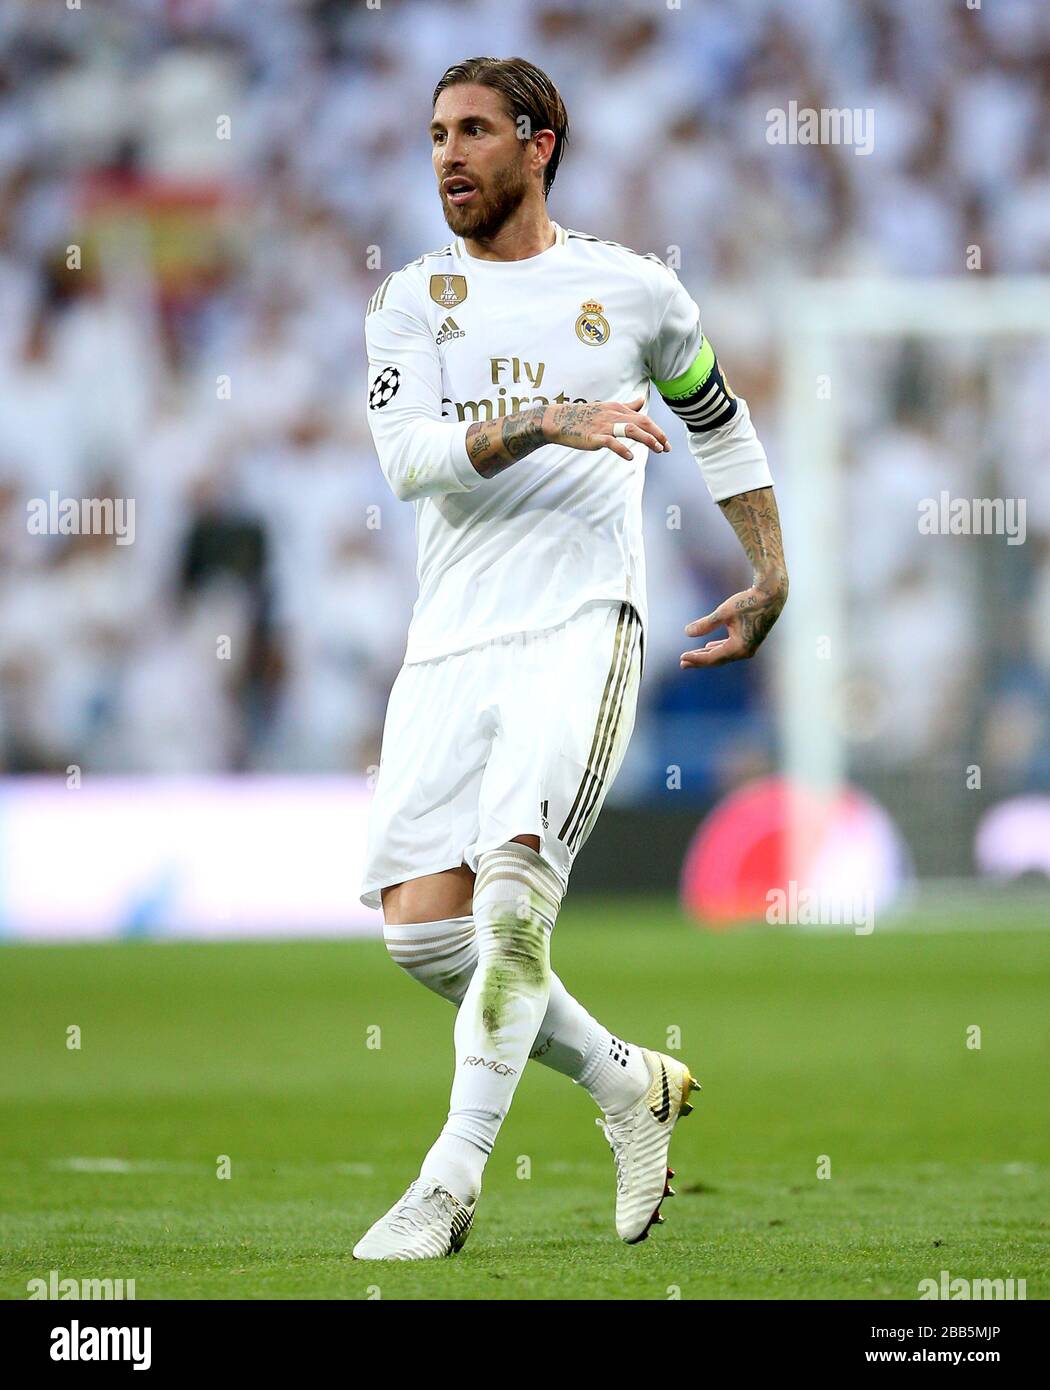 Real Madrid's Sergio Ramos in action Stock Photo - Alamy